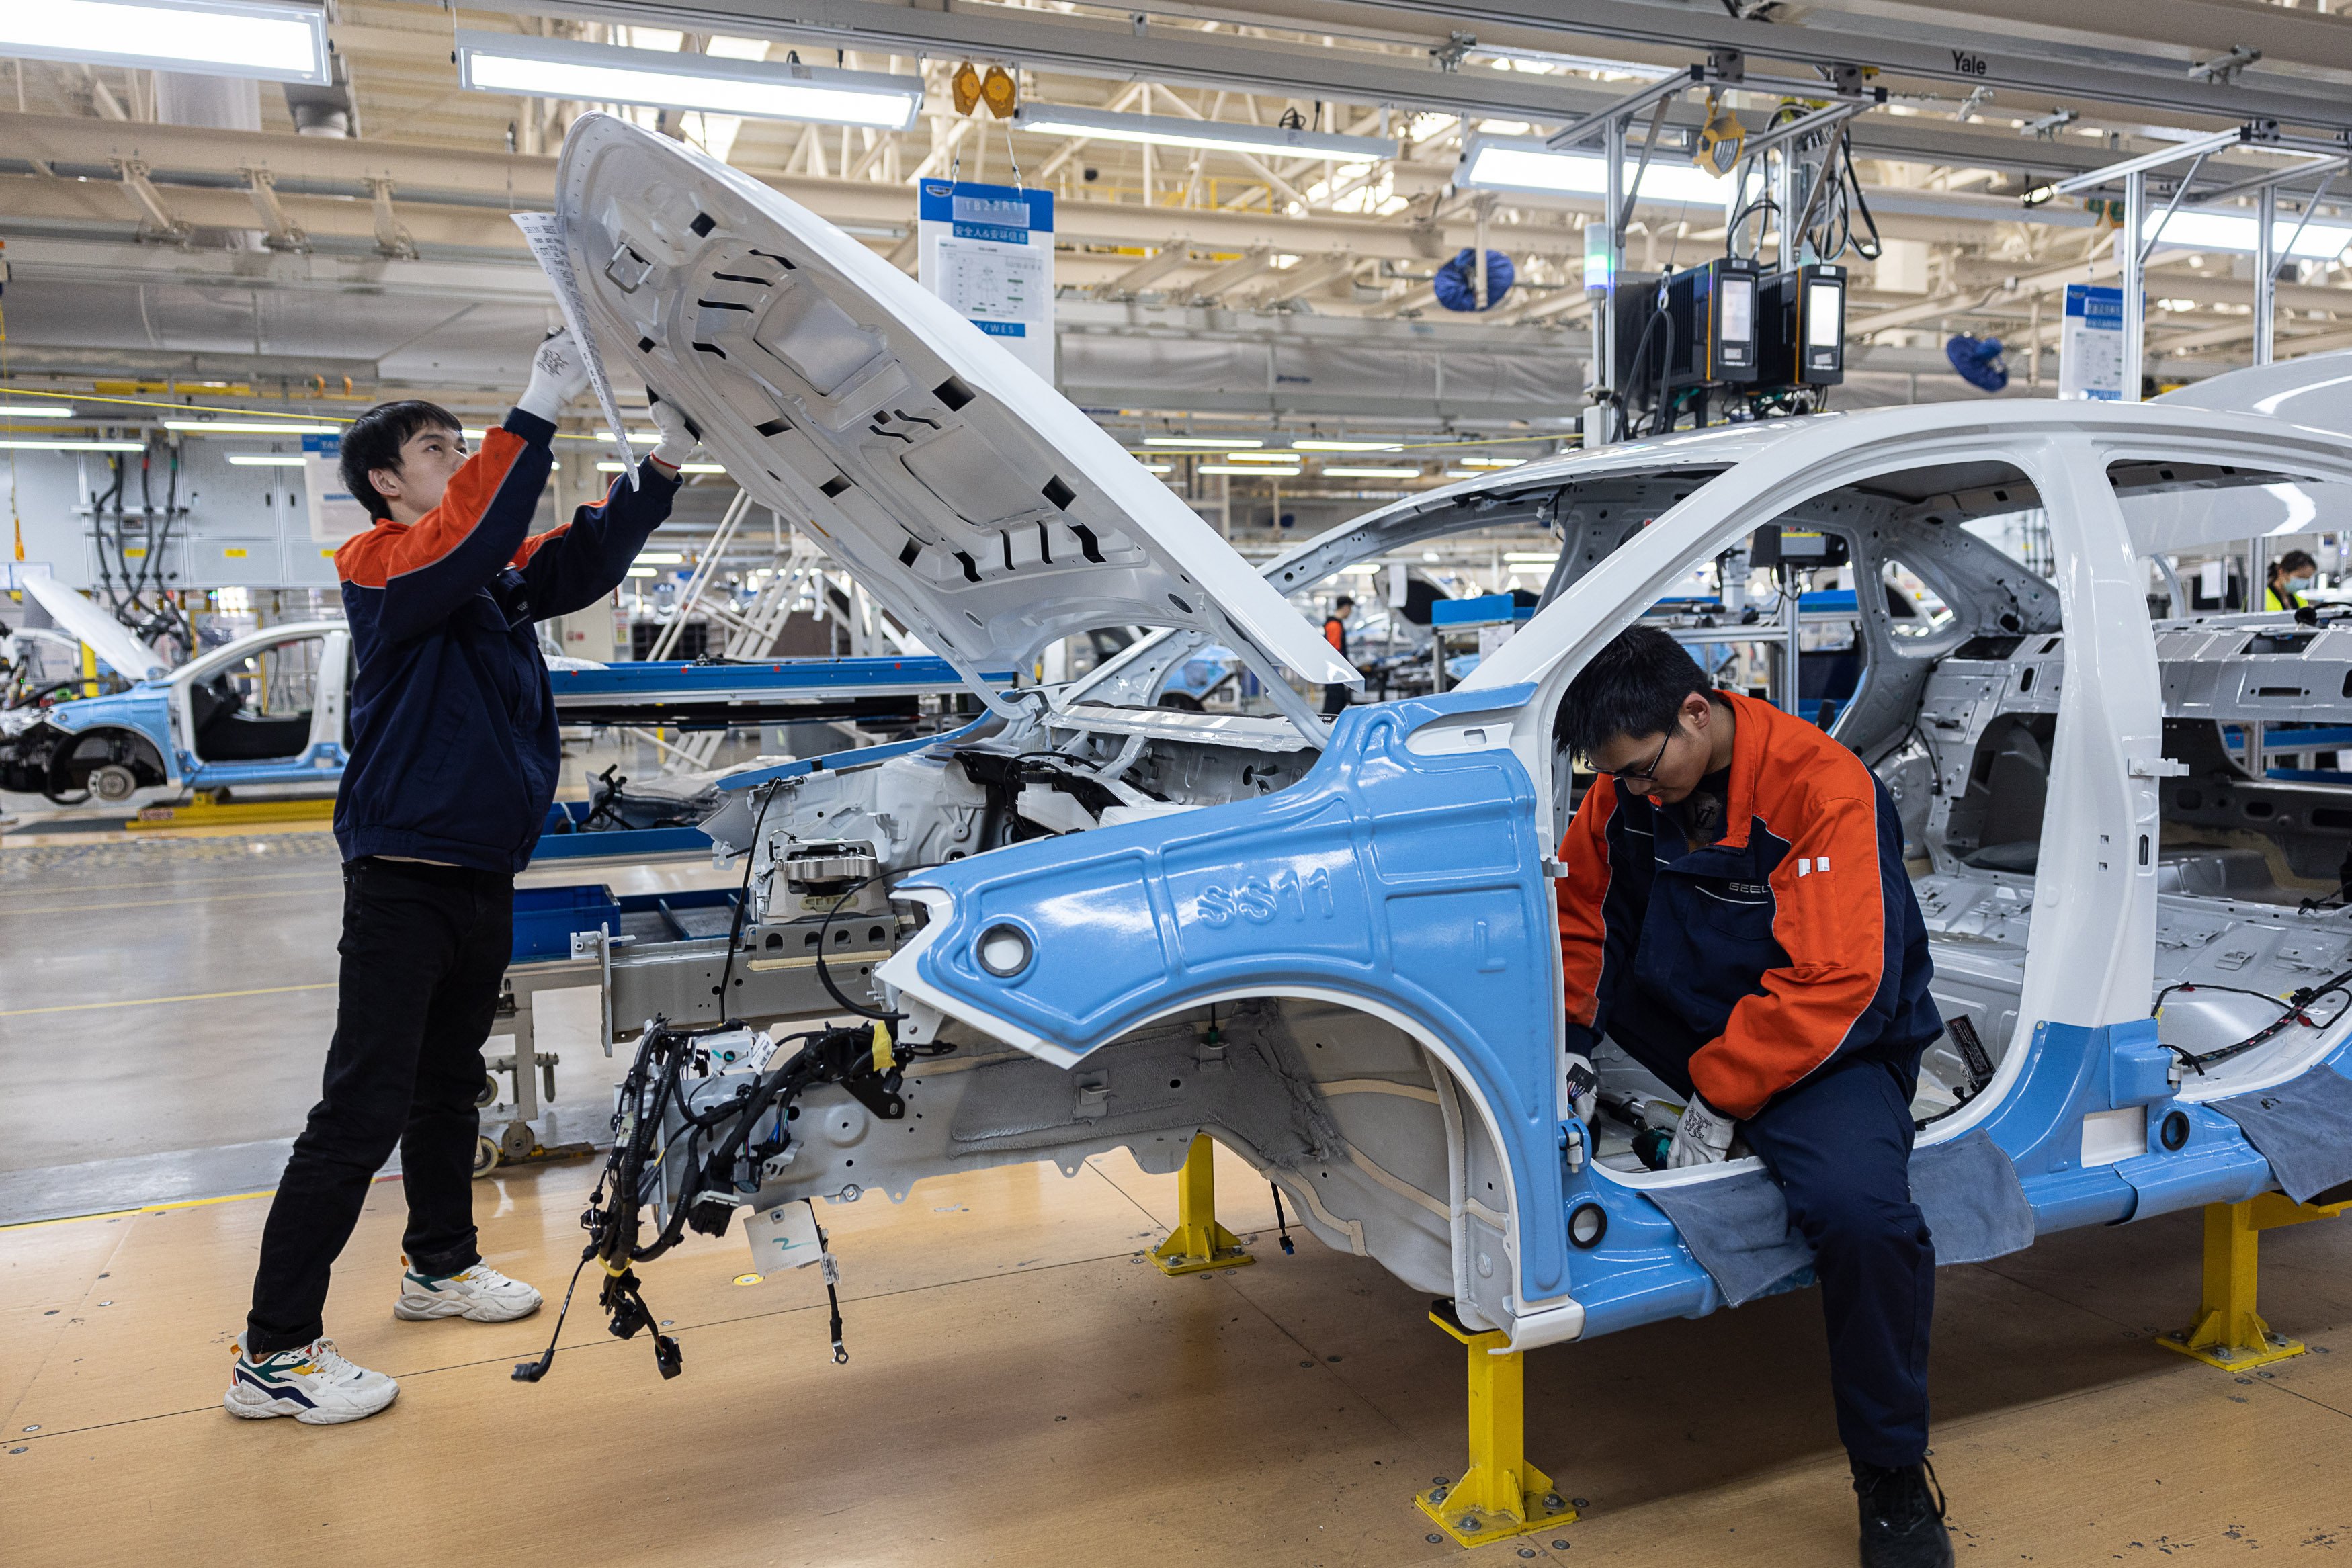 A Geely Auto assembly line in Huzhou, in China’s Zhejiang province. The new venture, which does not have an official name yet, will have 17 plants and 19,000 employees. Photo: Getty Images